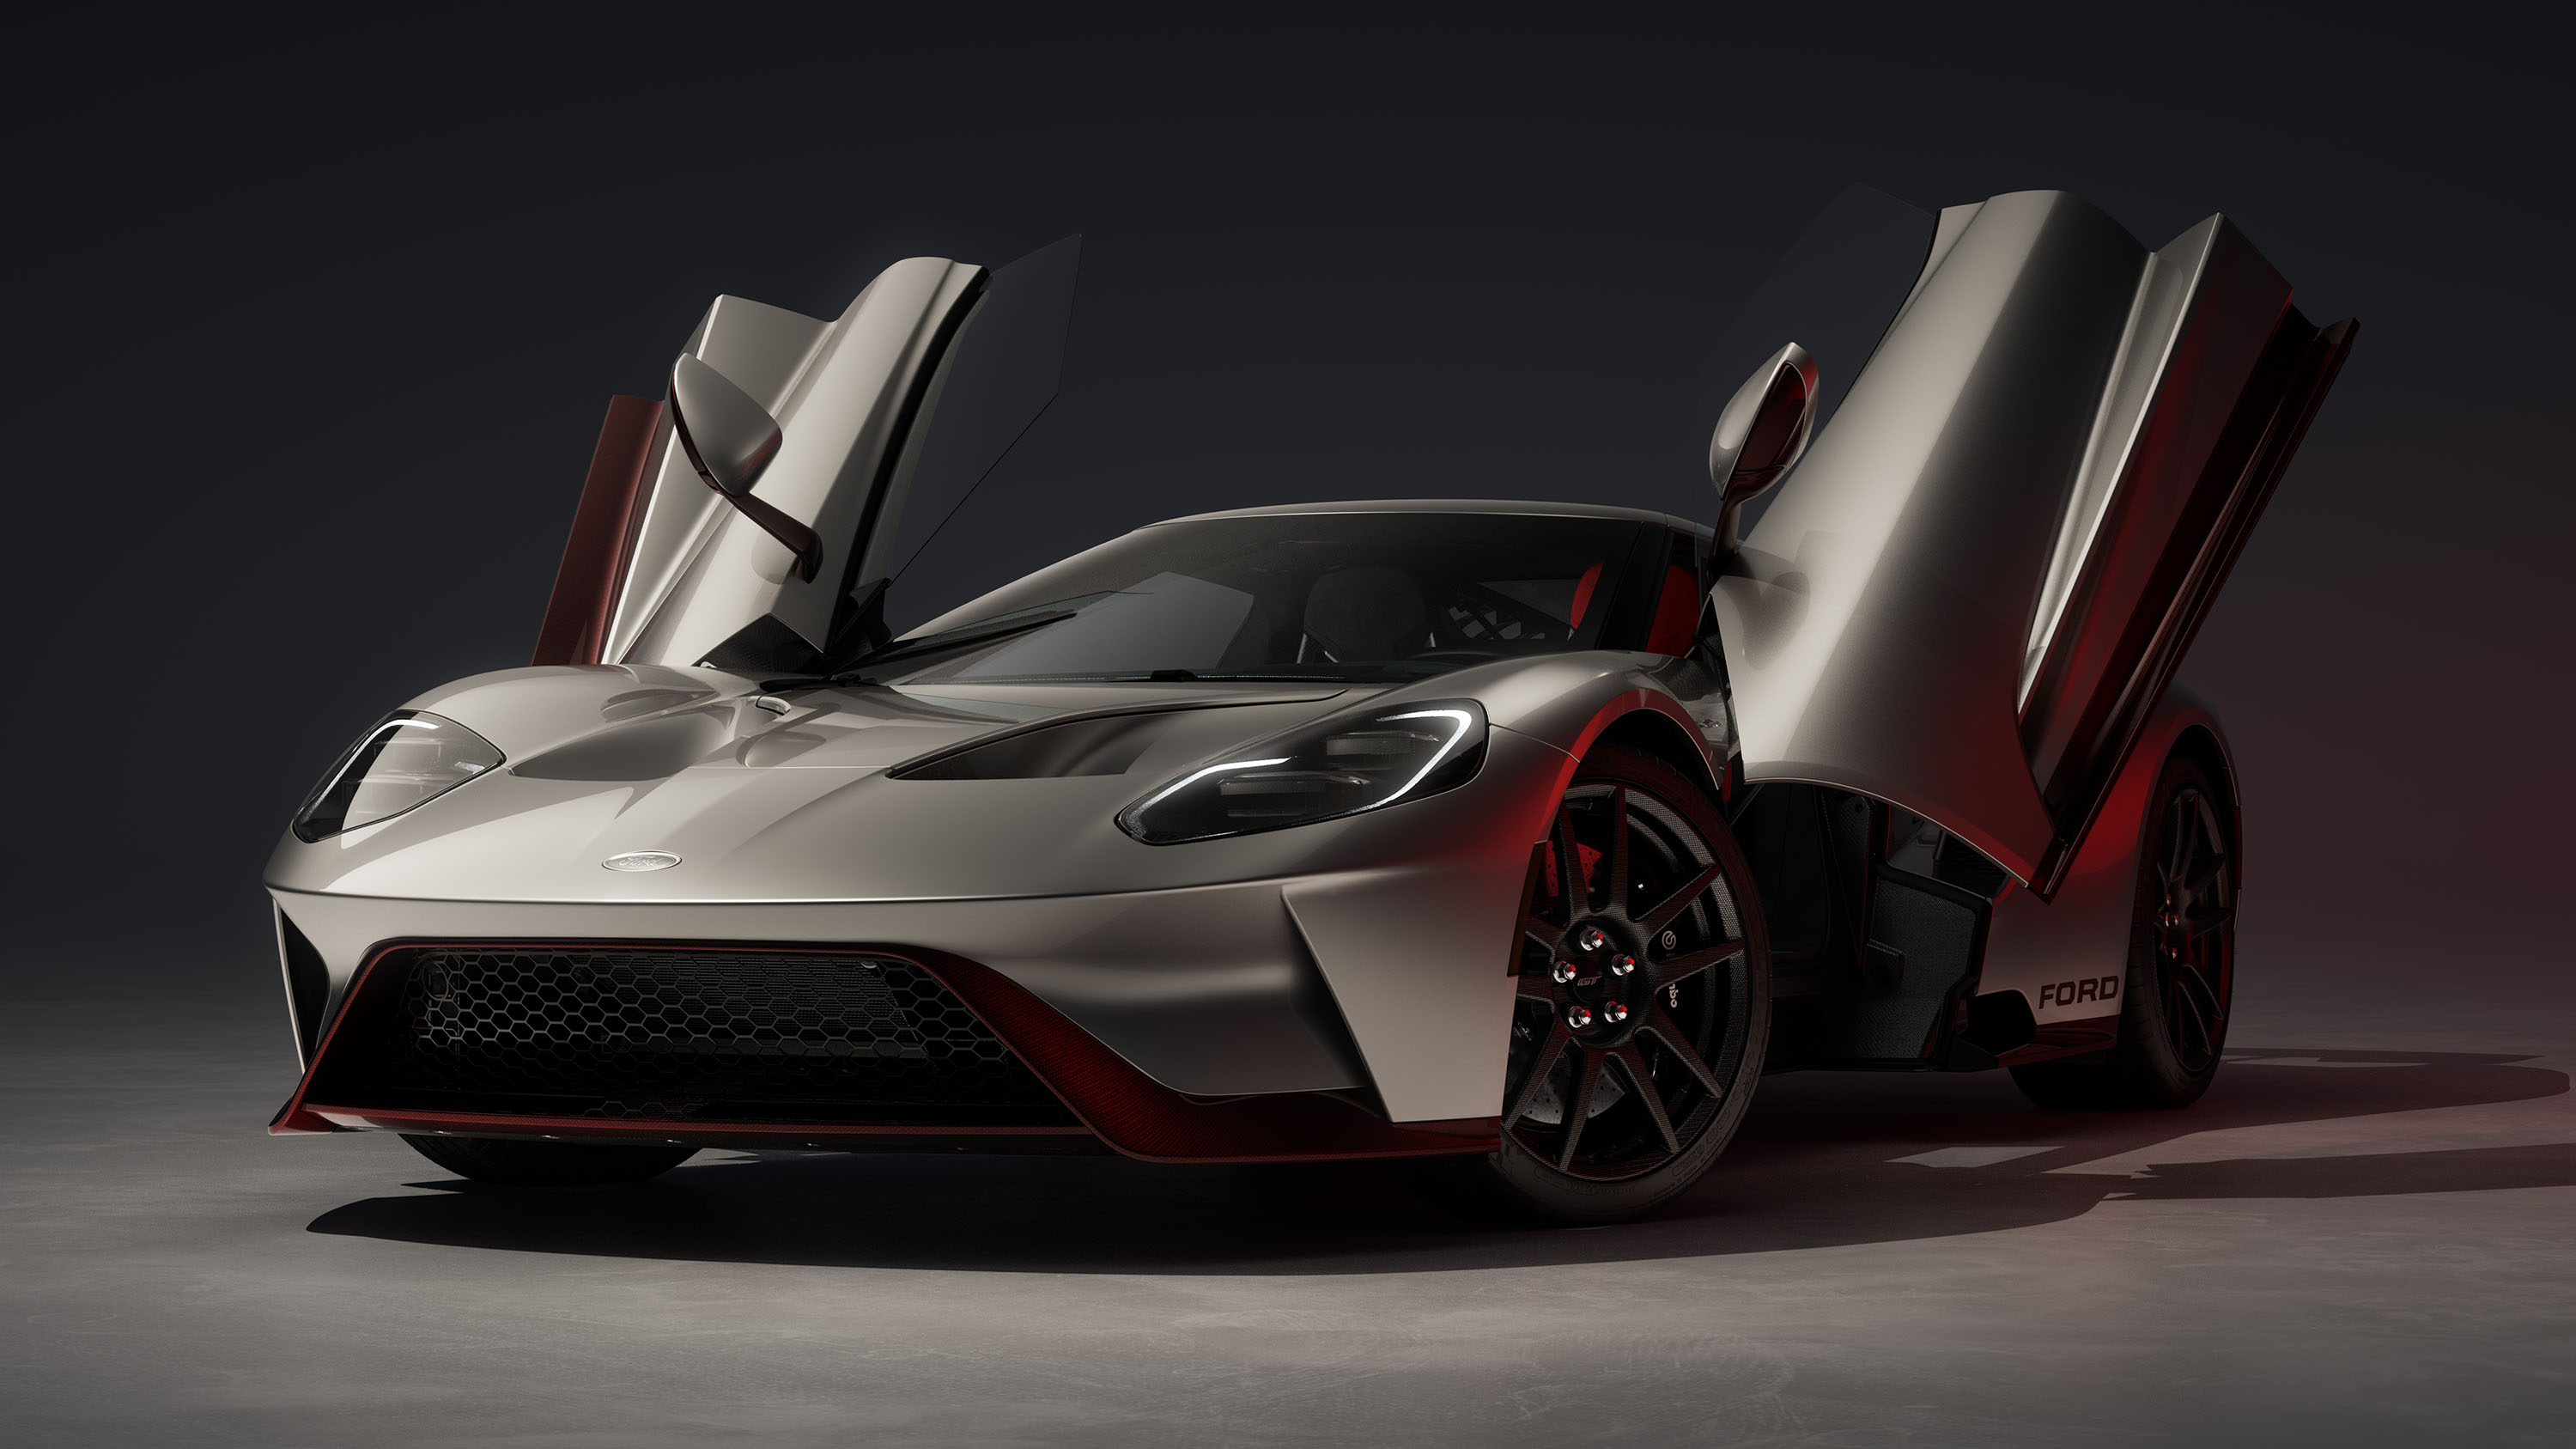 The Last Ford GT, a New RAM TRX Model, & Goodbye to the Kia Stinger